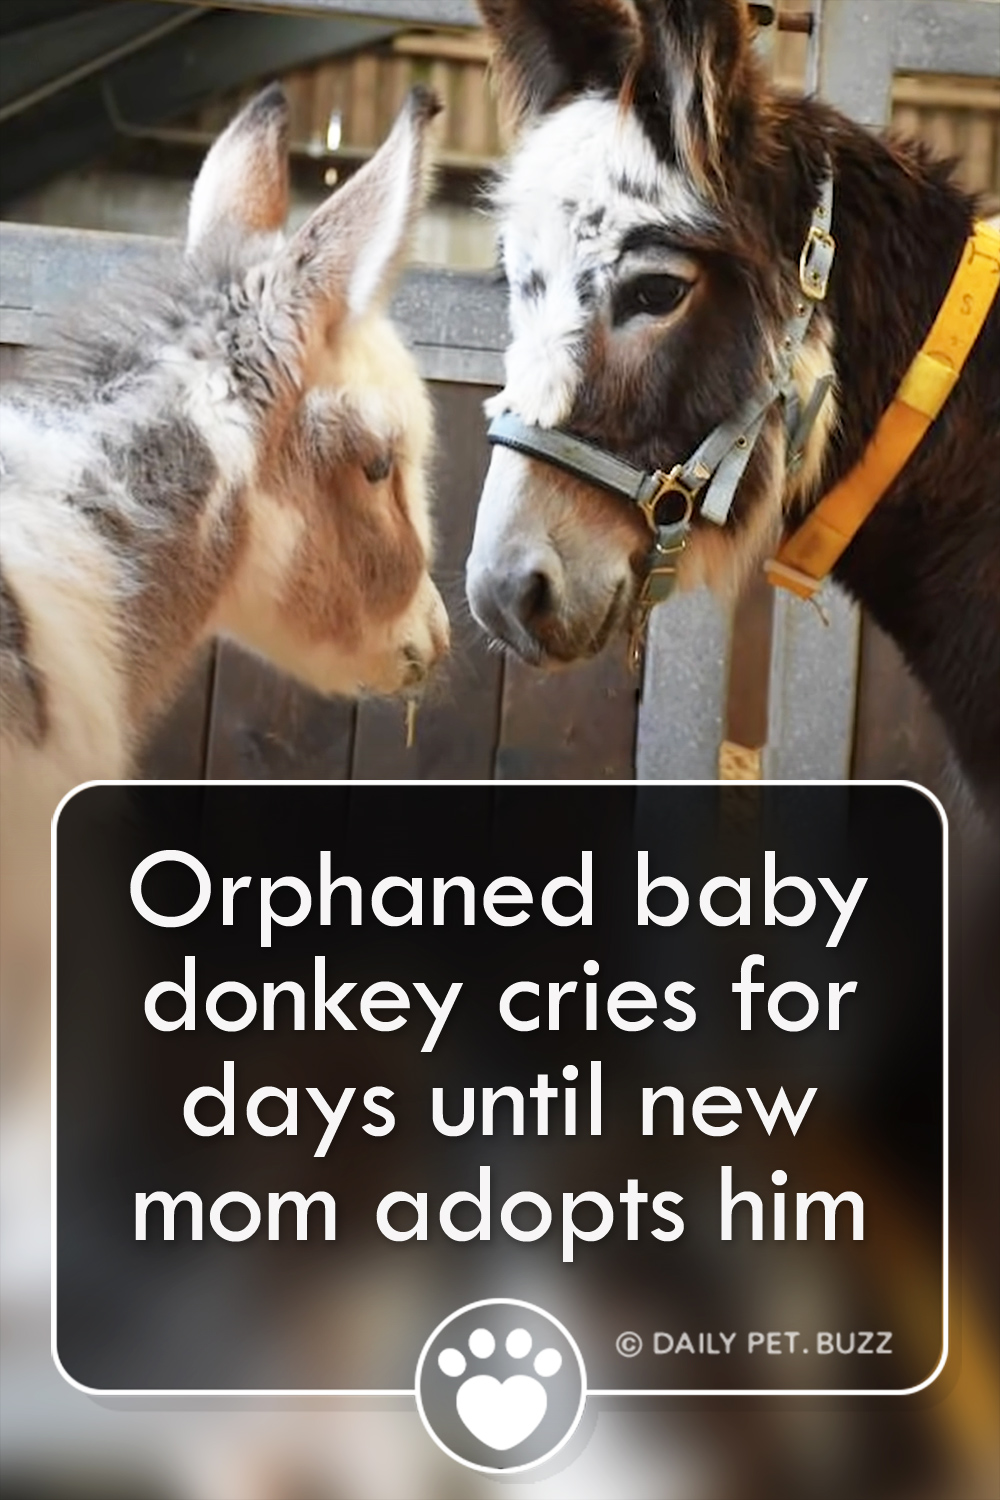 Orphaned baby donkey cries for days until new mom adopts him